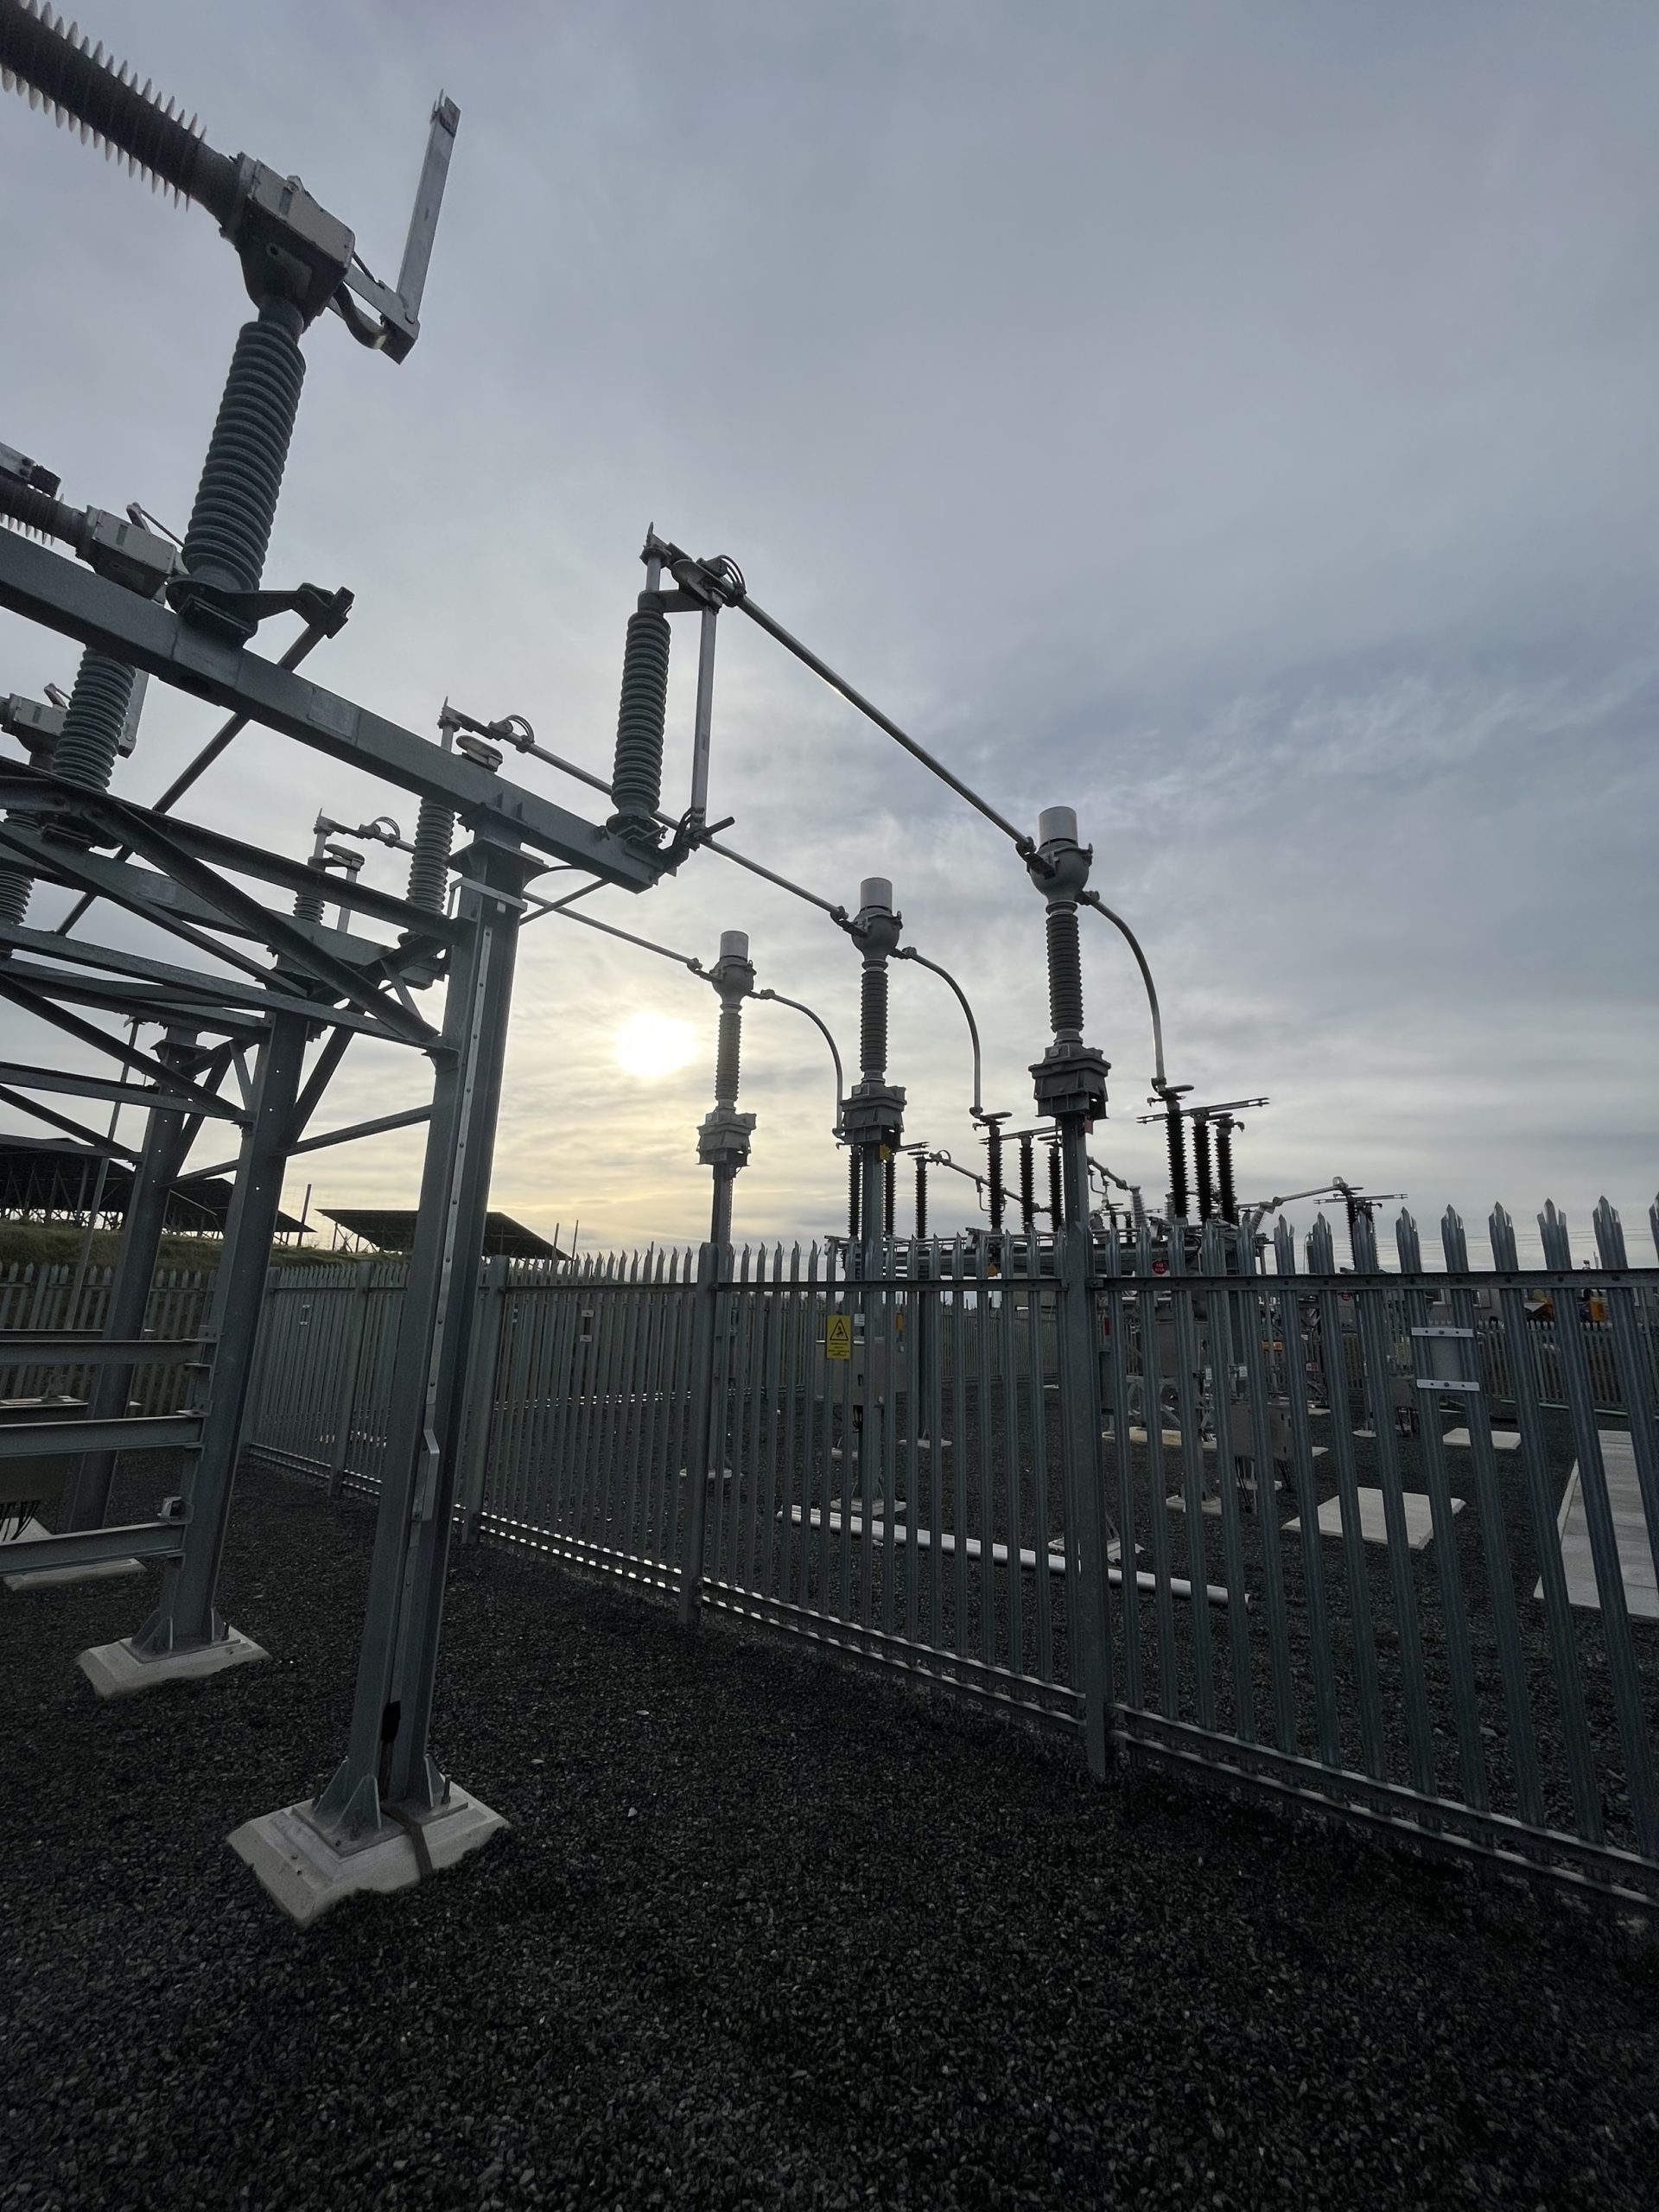 an electrical substation